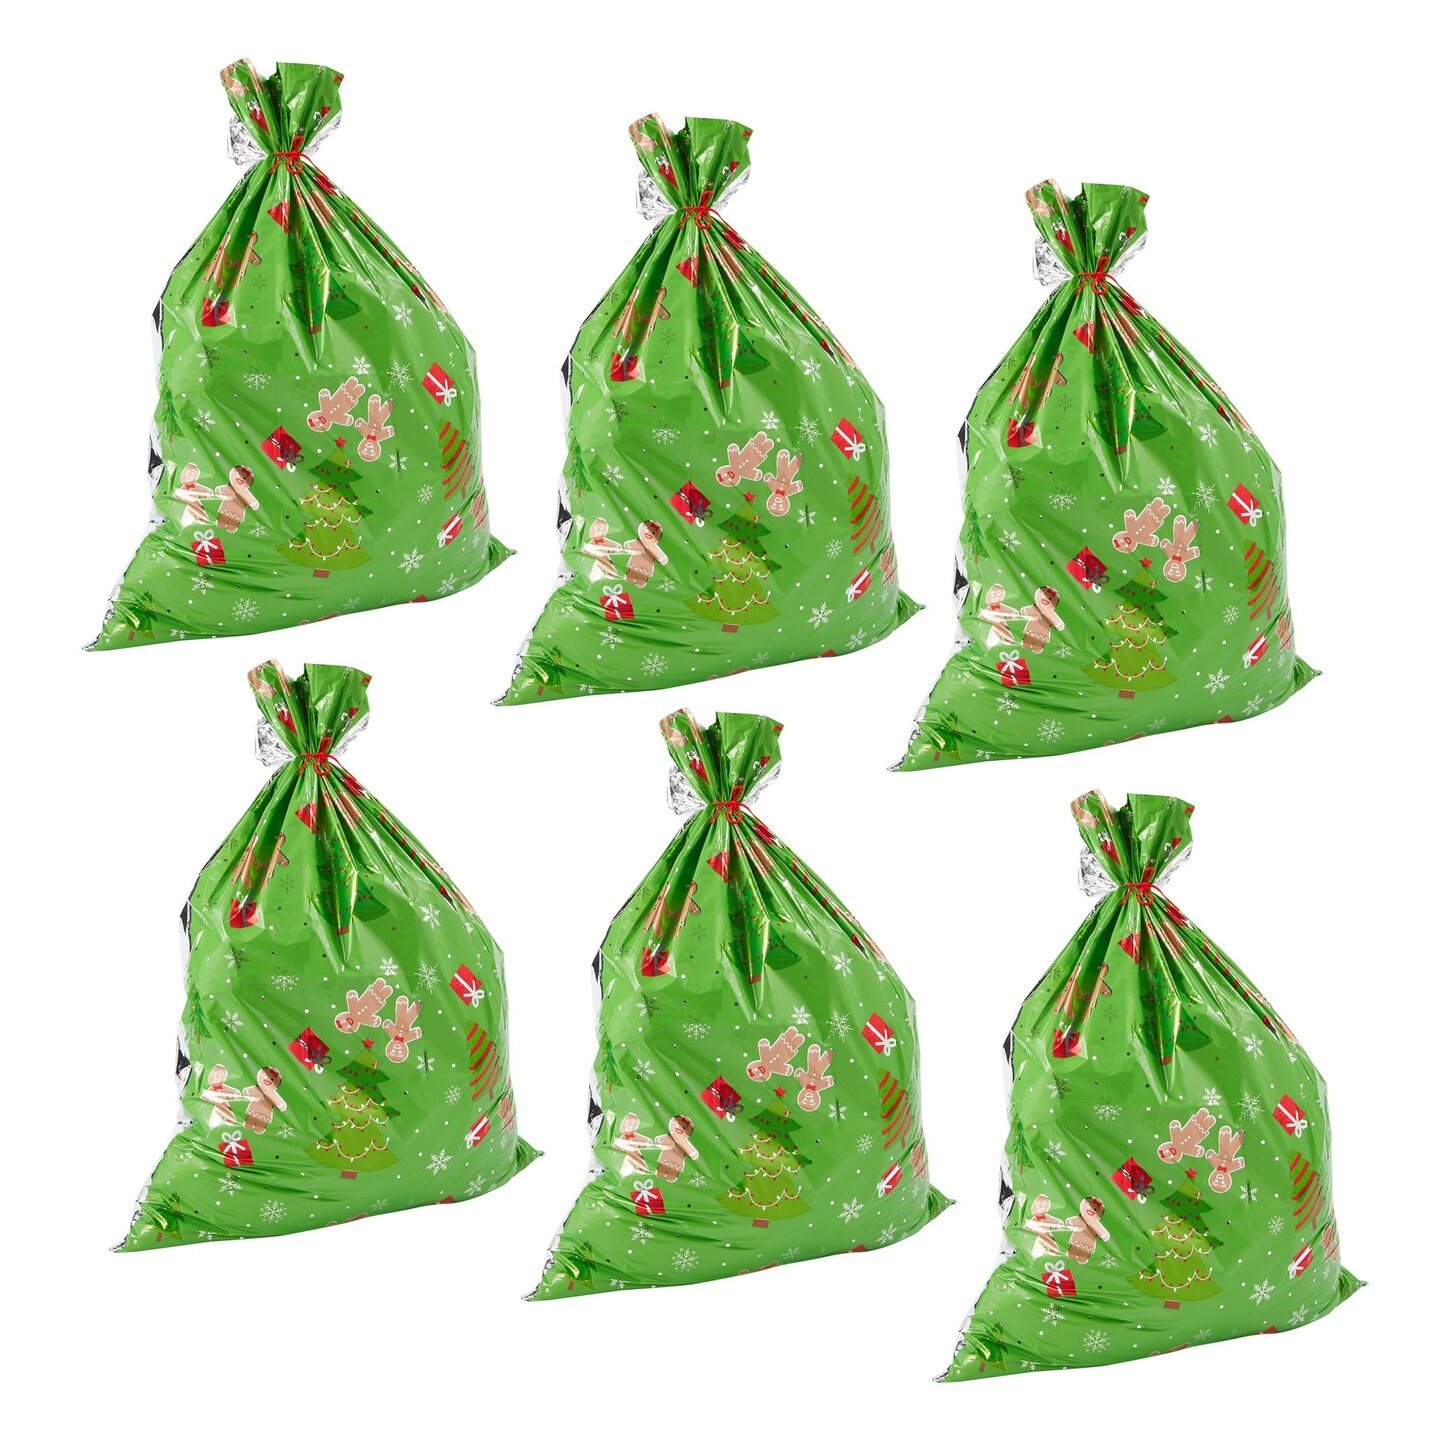 6 Pack Jumbo Christmas Candy Cane Gift Bags, Large Plastic Gift